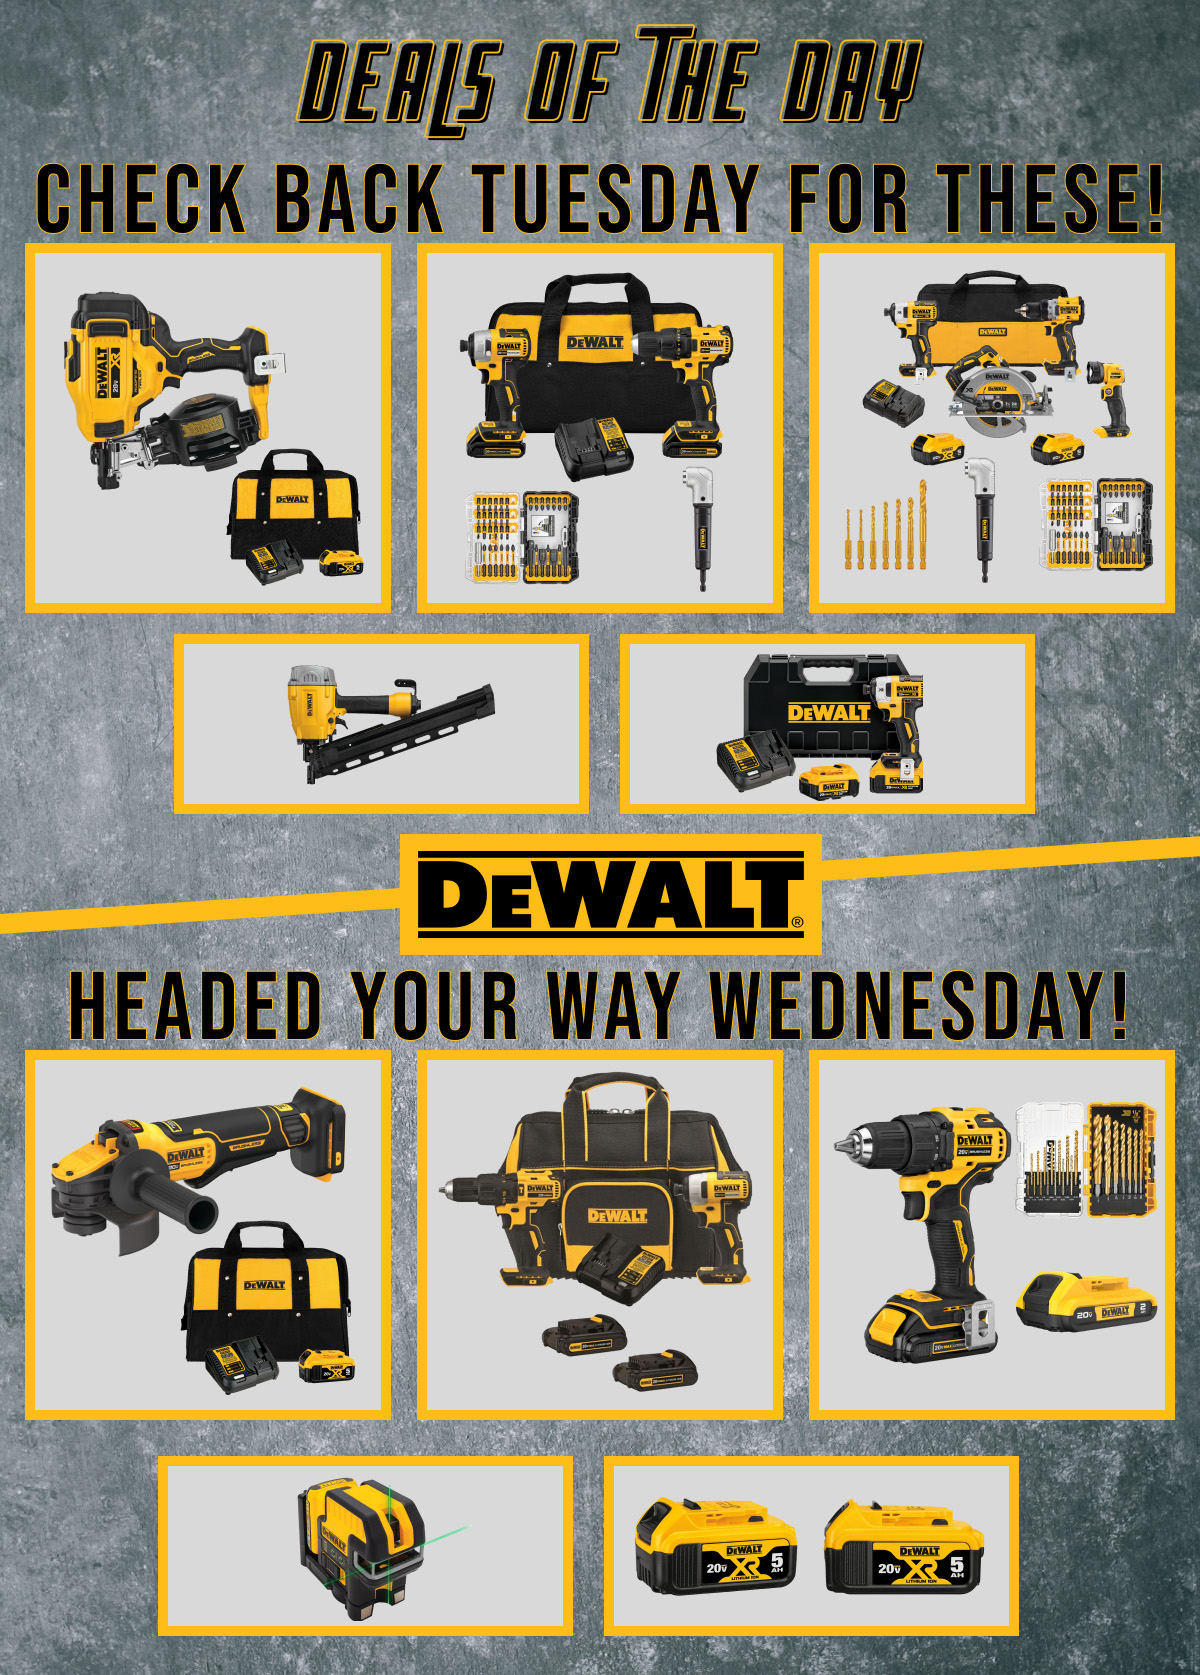 Check Back Tuesday and Wednesday for More Deals of the Day!